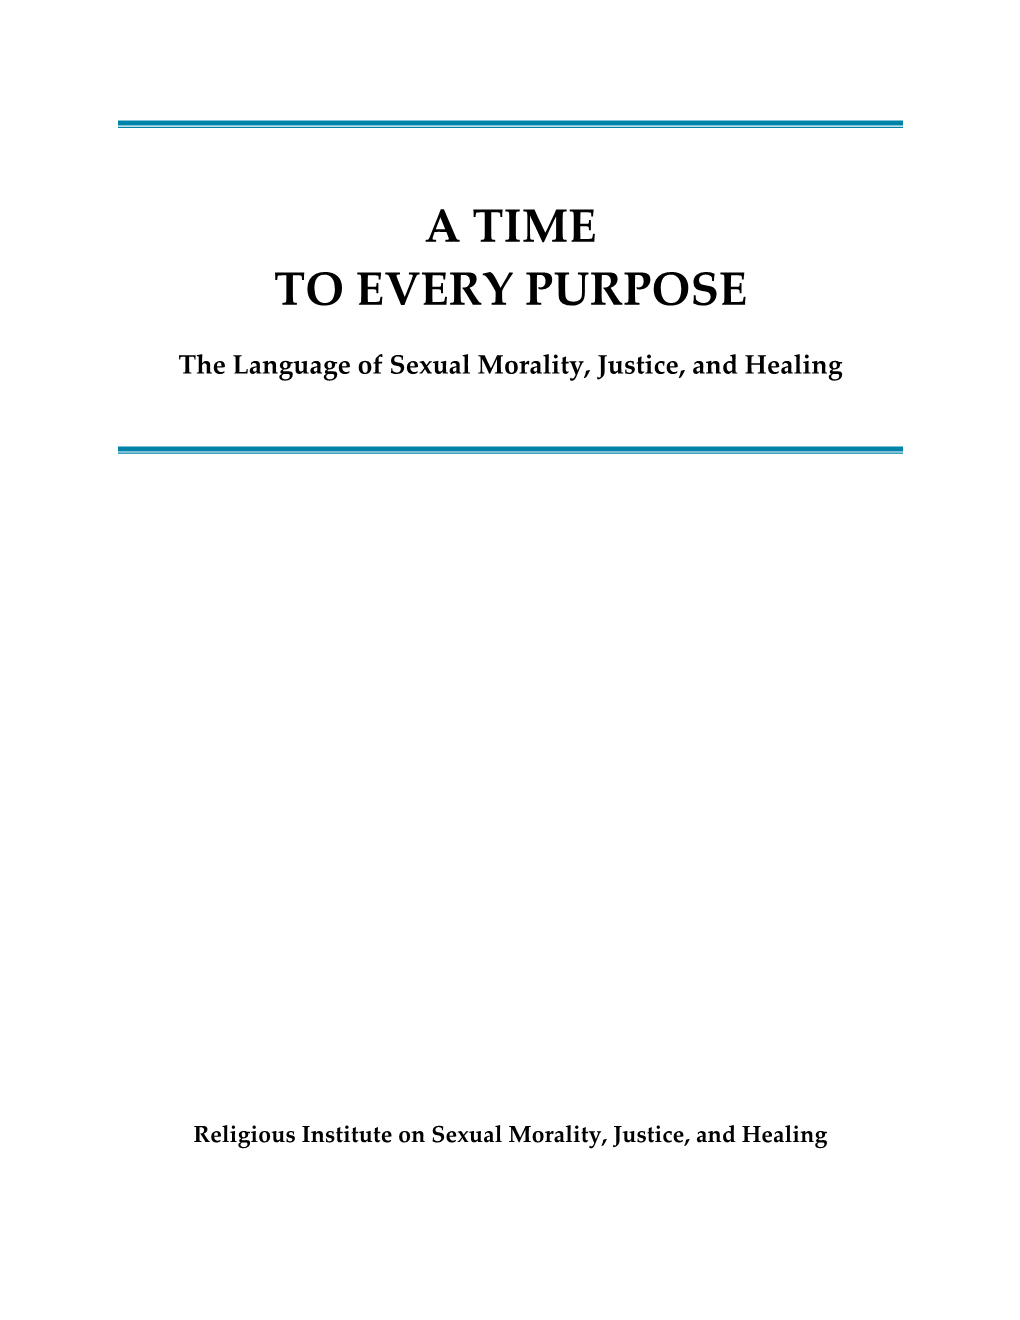 A Time to Every Purpose: the Language Of